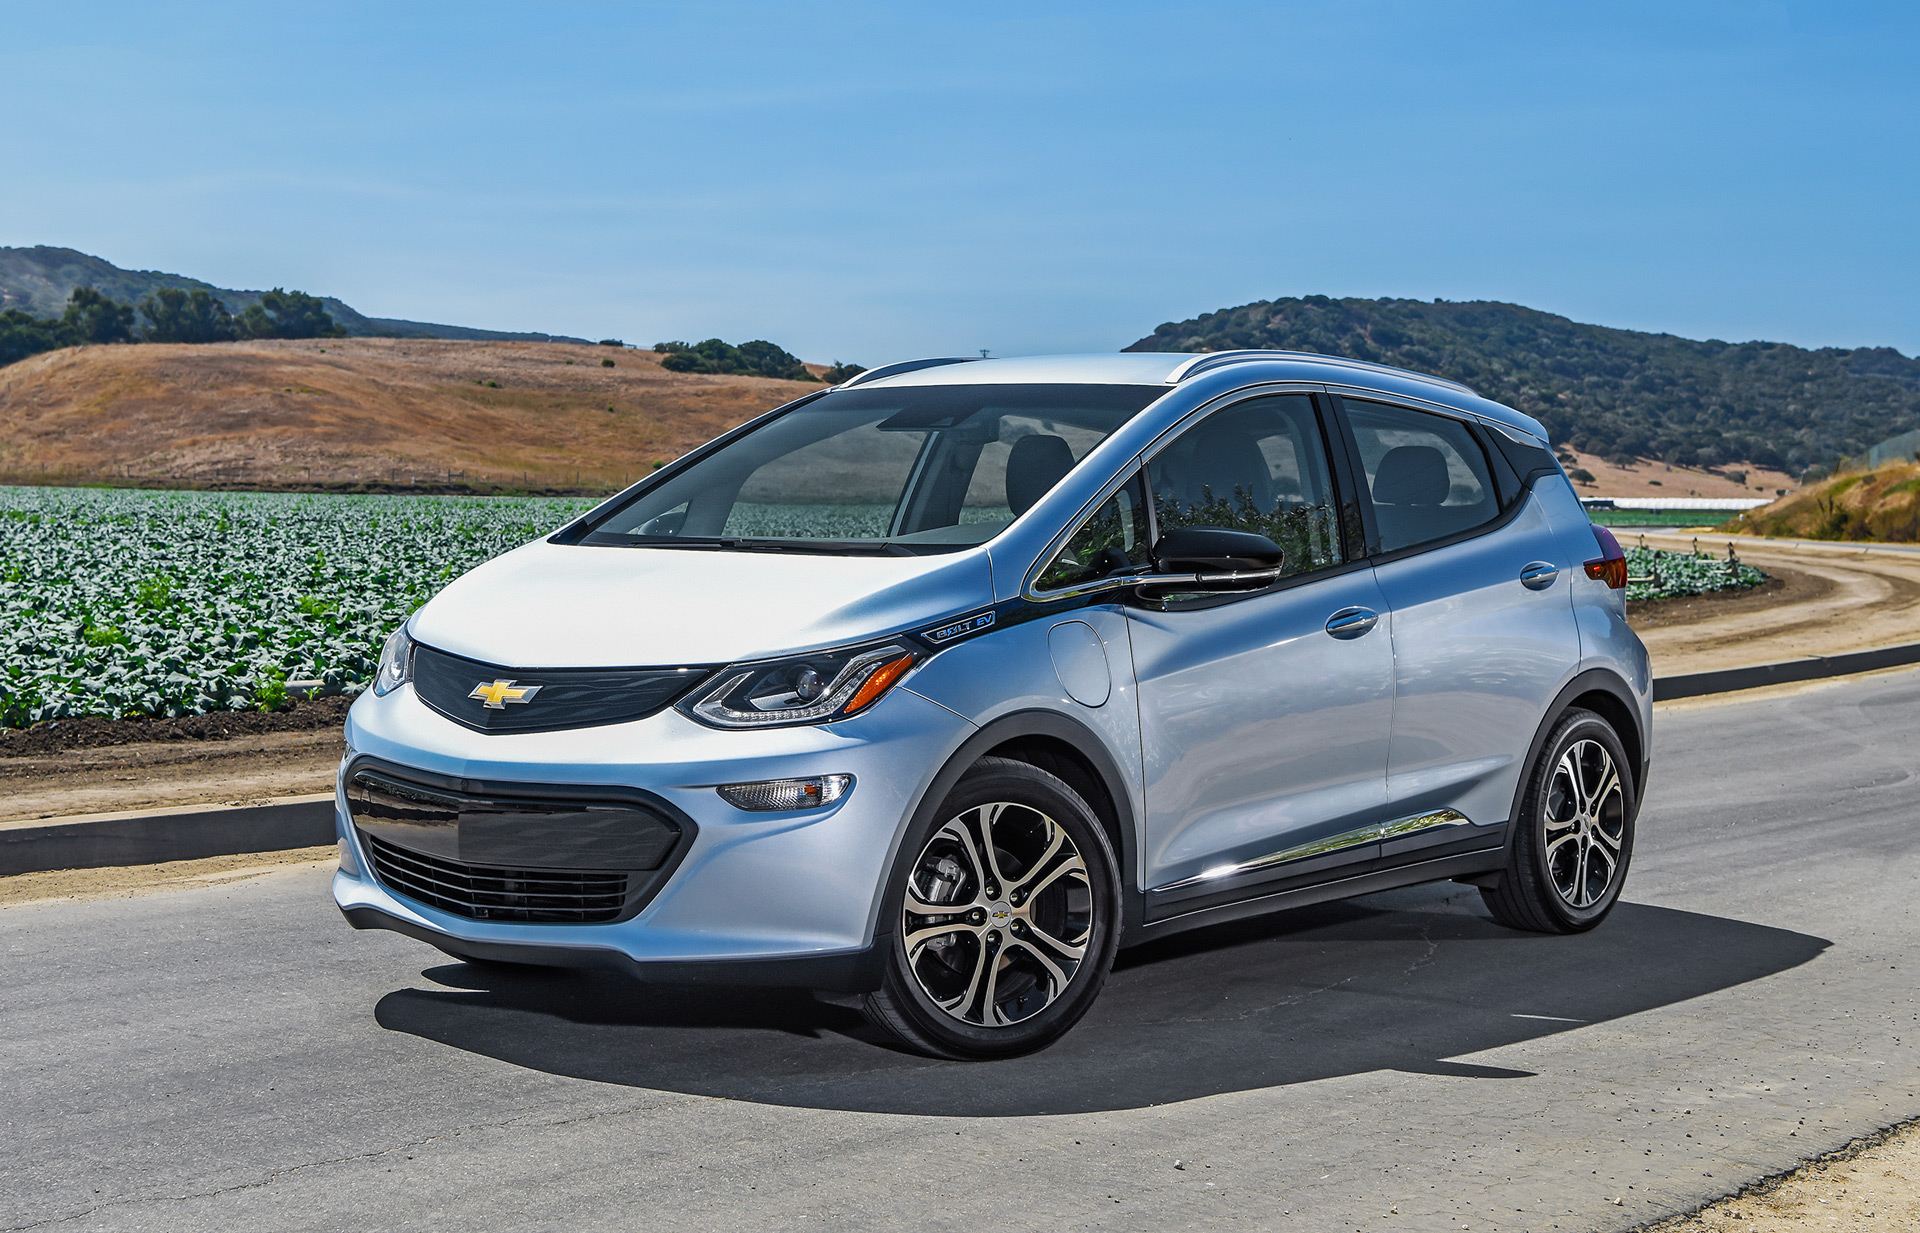 GM asks Chevy Bolt EV drivers to park 50 feet from other vehicles, due to fire riskGM asks Chevy Bolt EV drivers to park 50 feet from other vehicles, due to fire risk